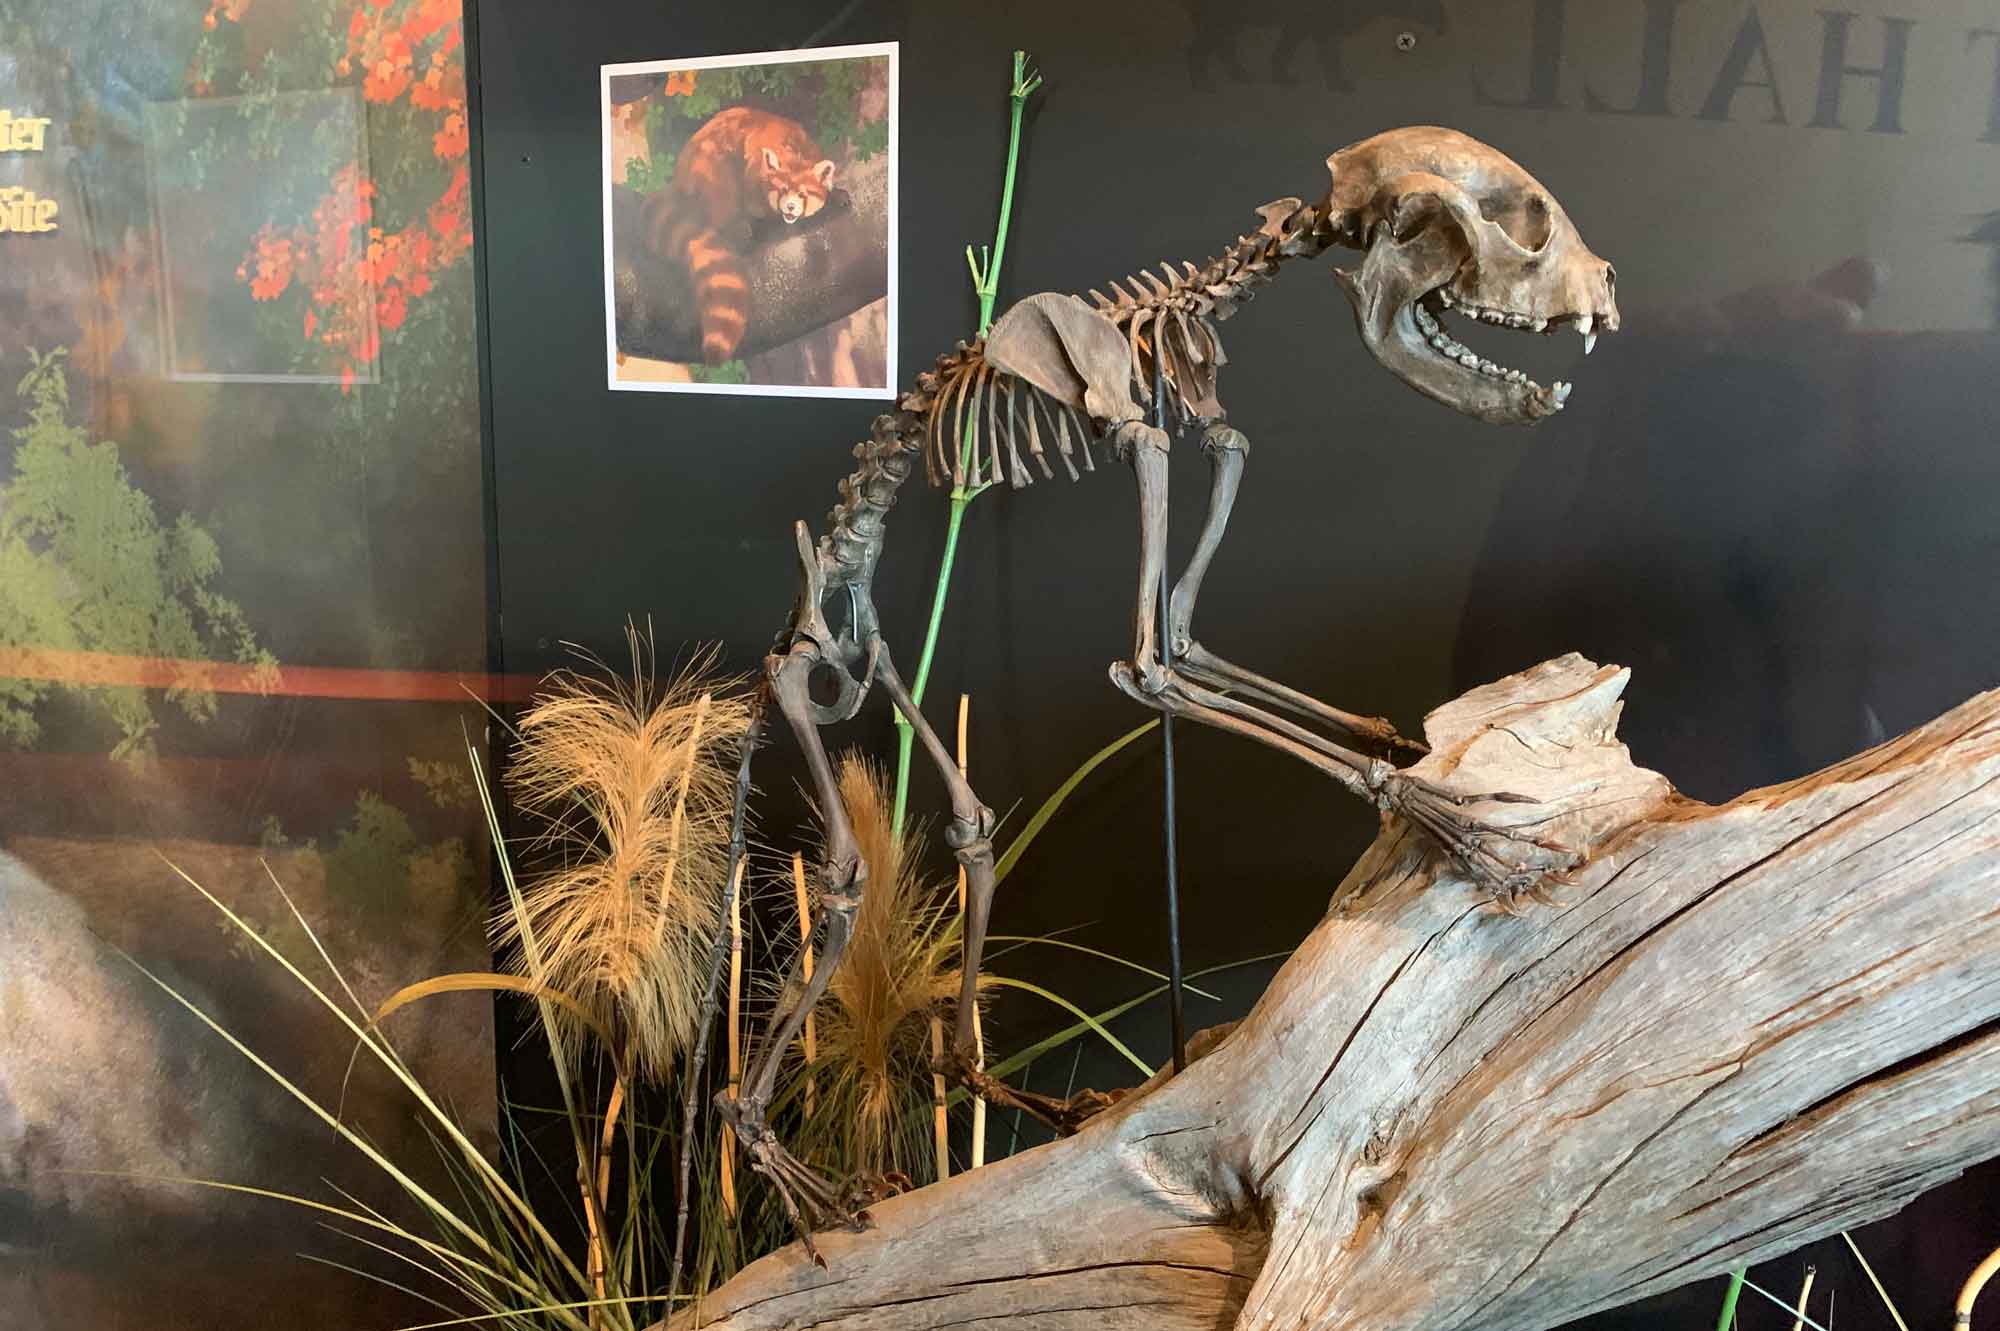 Photograph of a Red Panda fossil on display at Gray Fossil Site in Tennessee.